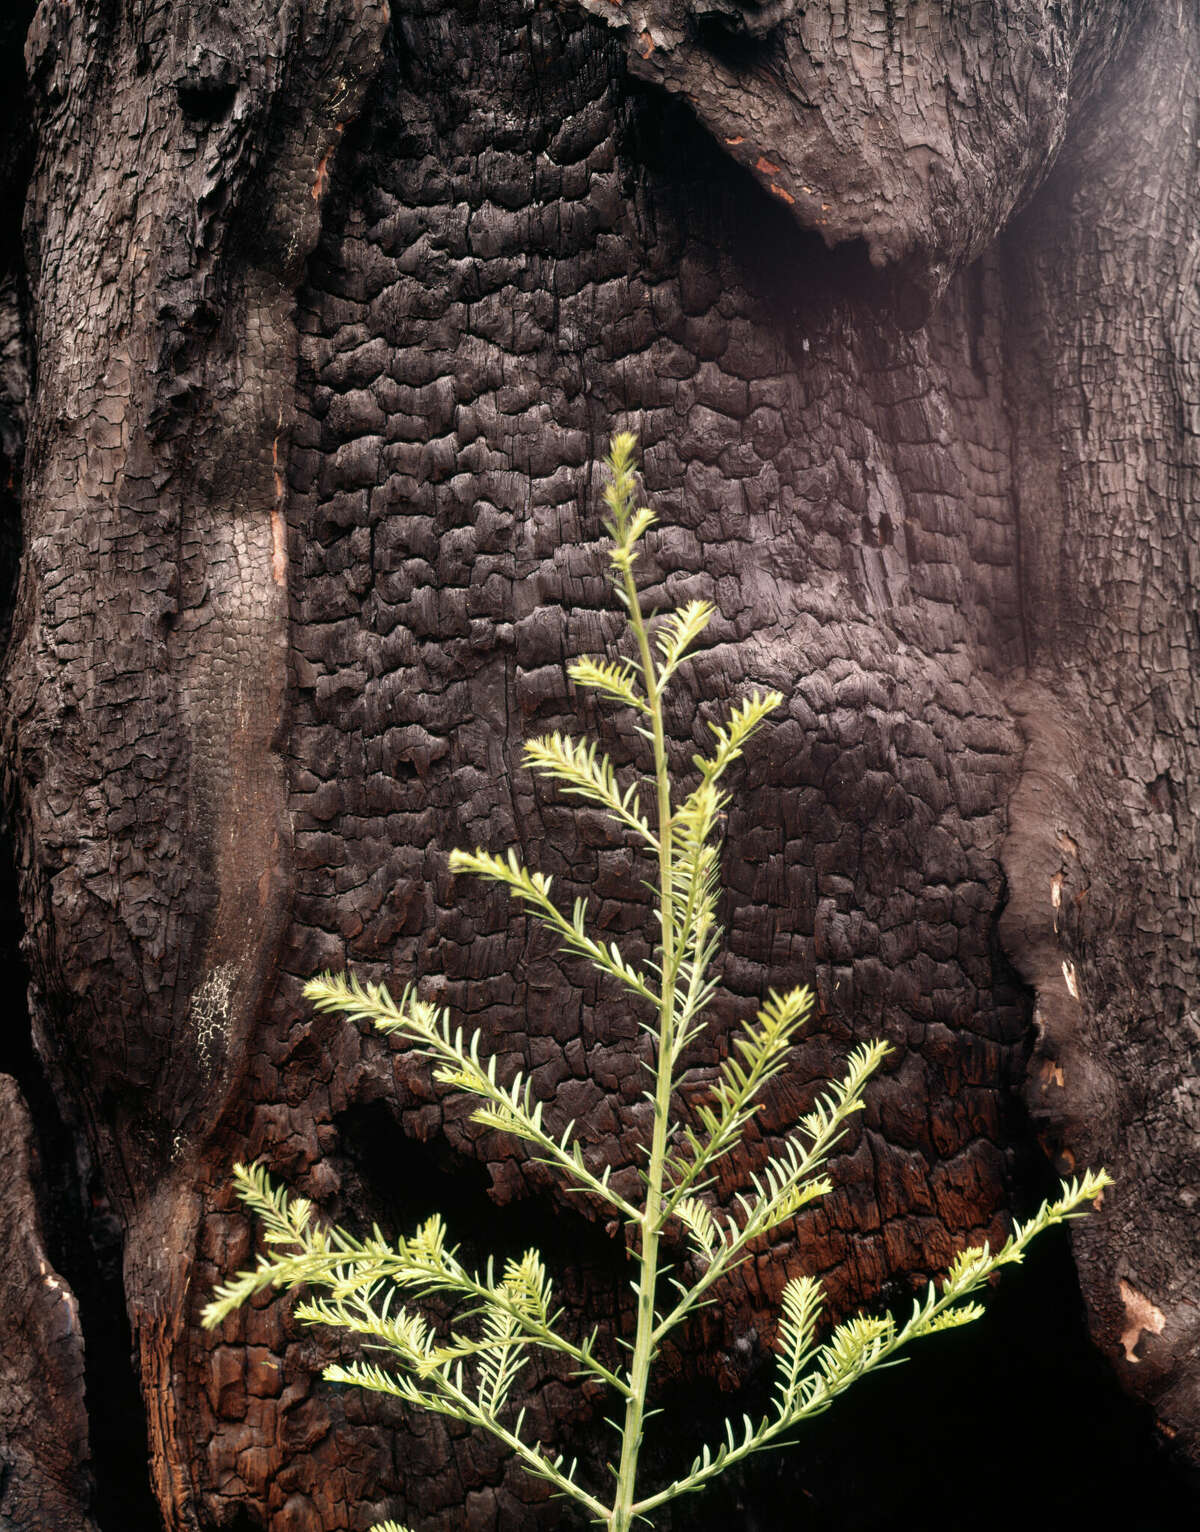 Pine seedling growing in front of a charred tree truck. (Photo by H. Abernathy/ClassicStock/Getty Images)